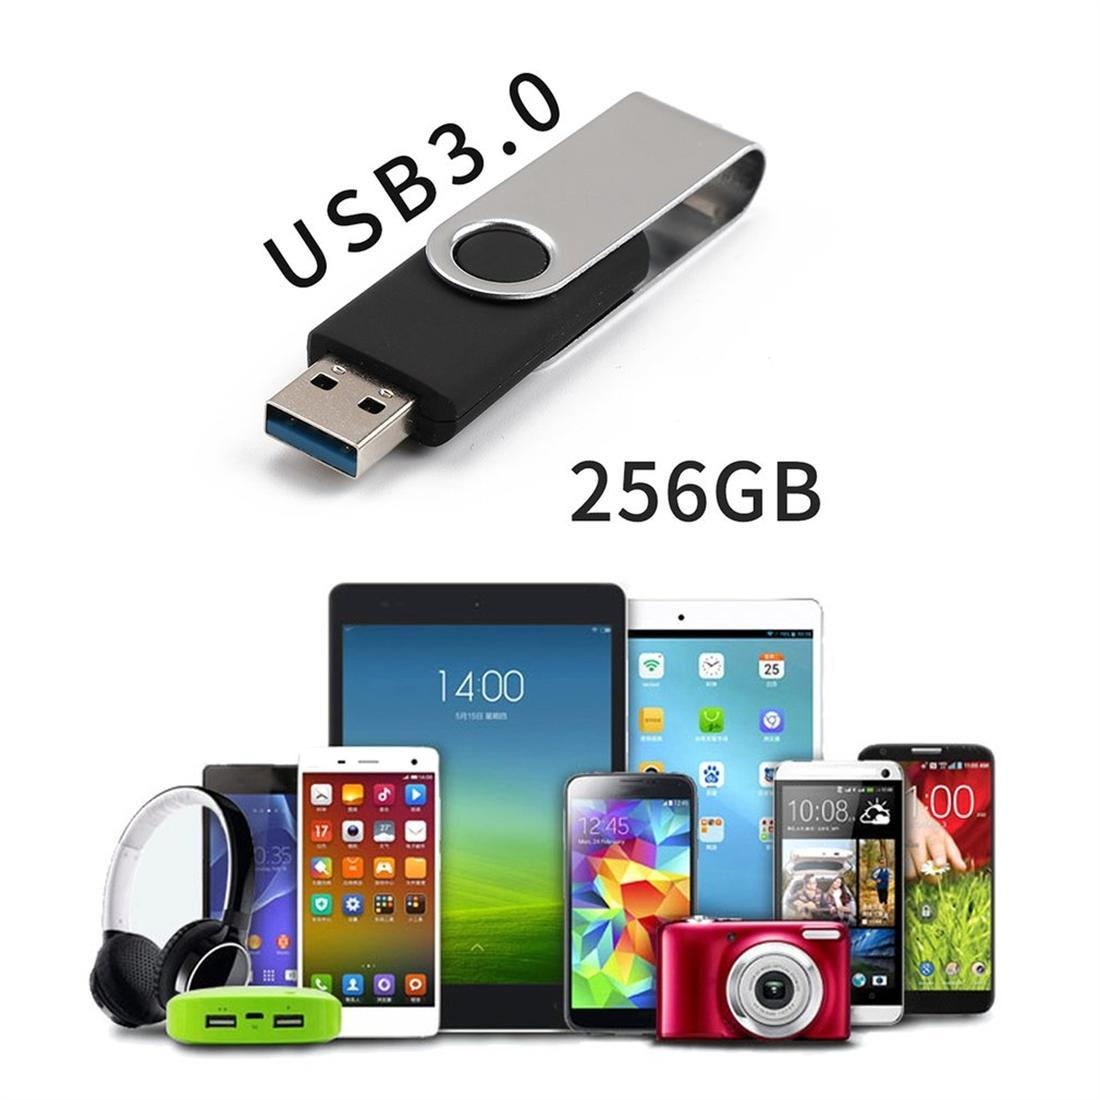 systemrescuecd how big for usb stick